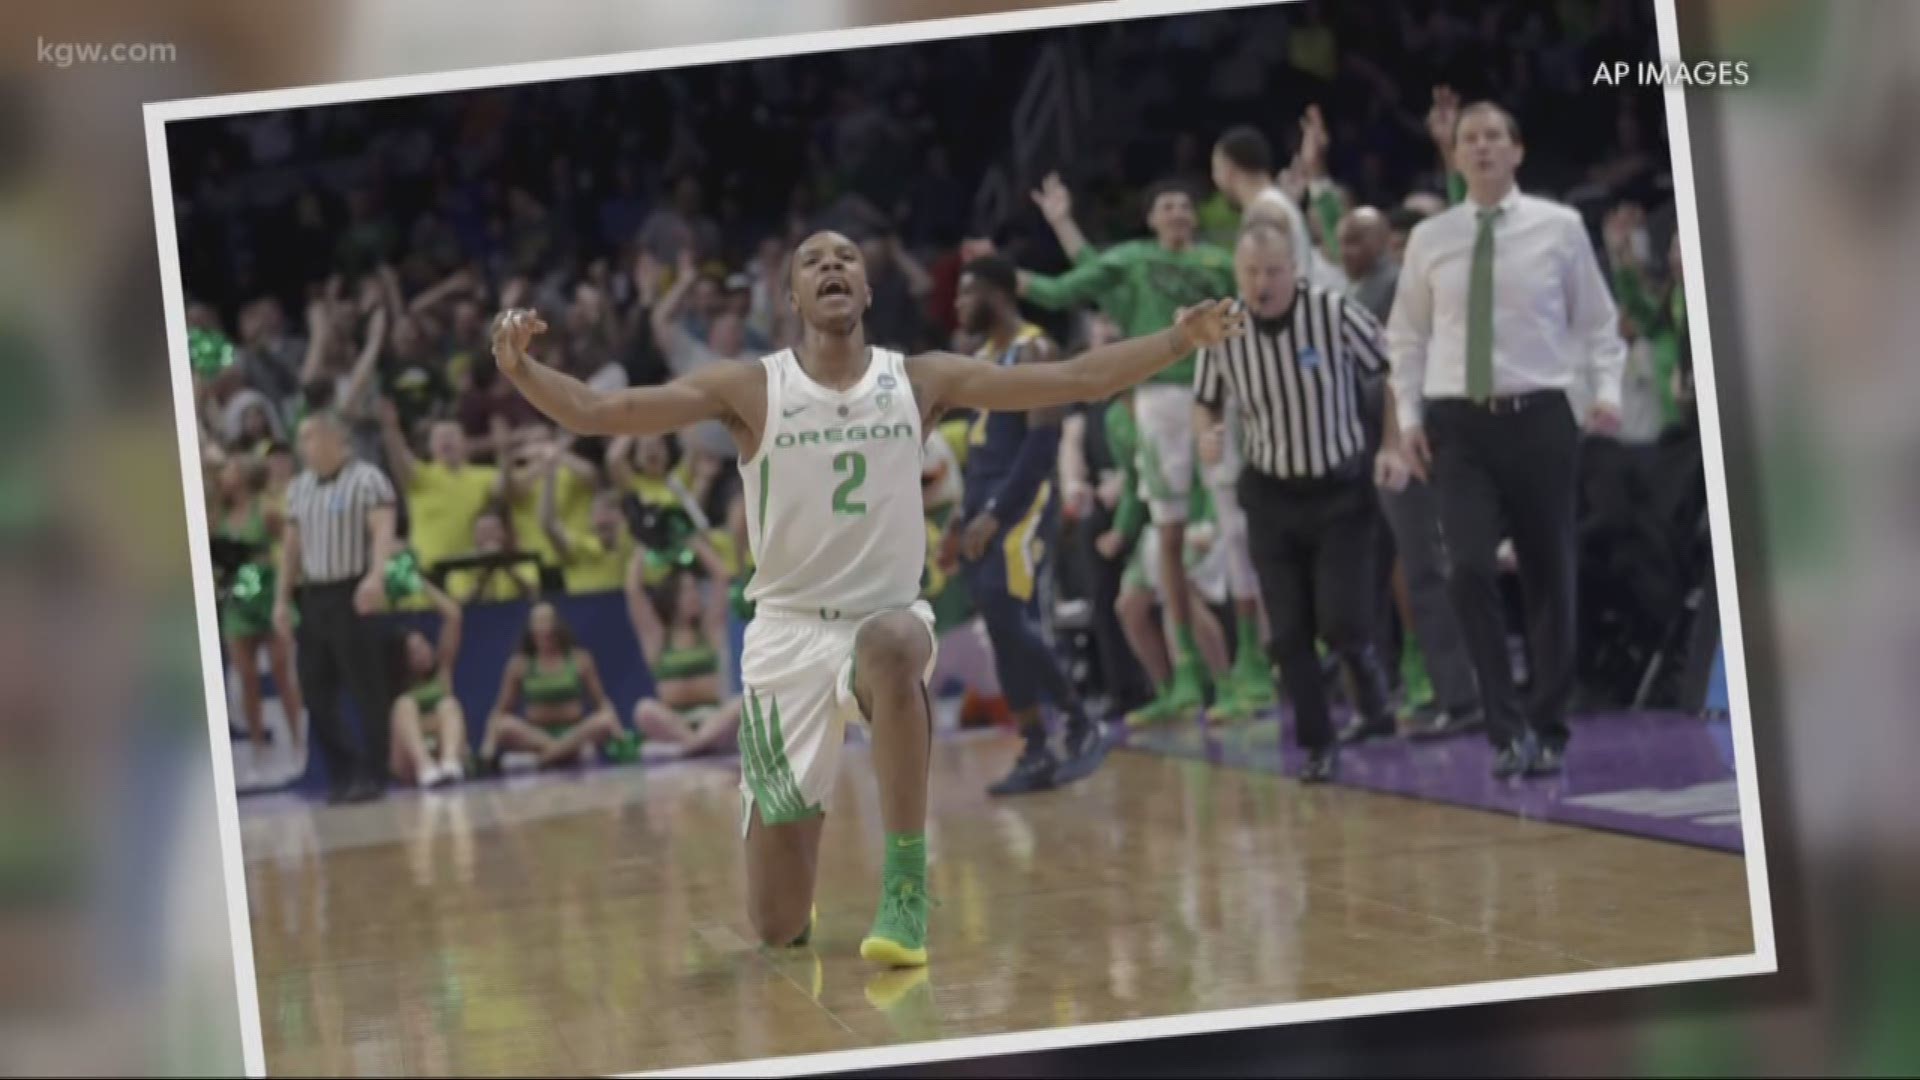 The Oregon Ducks have won 10 games in a row and are headed to Louisville to play top-seeded Virginia in the Sweet 16.